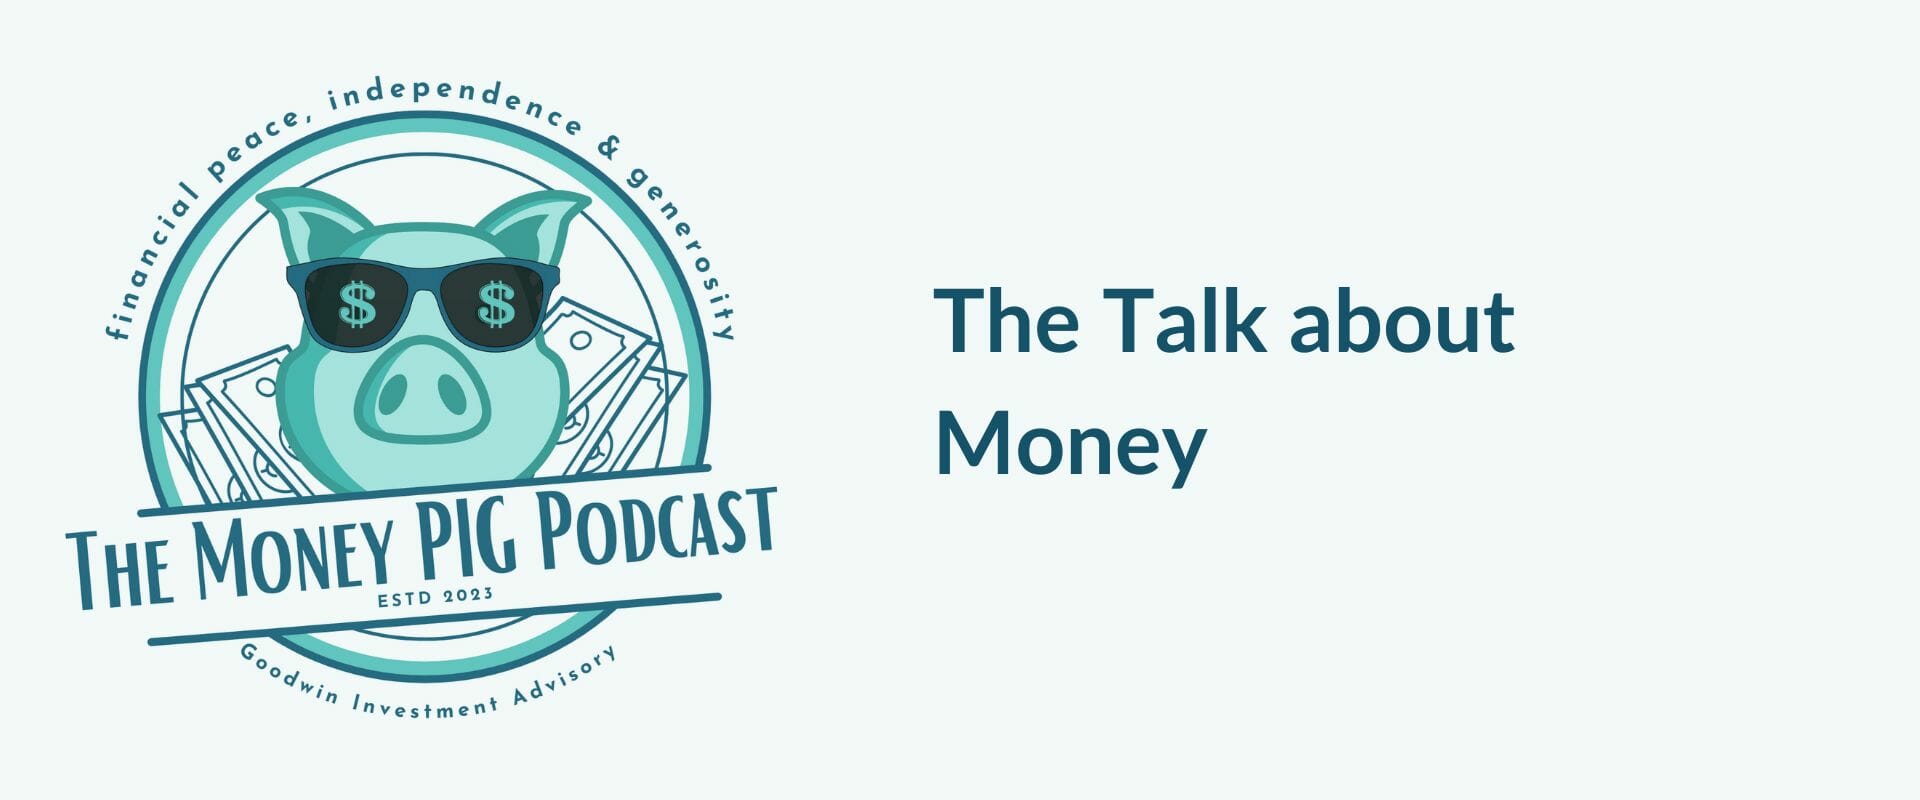 The Talk about Money